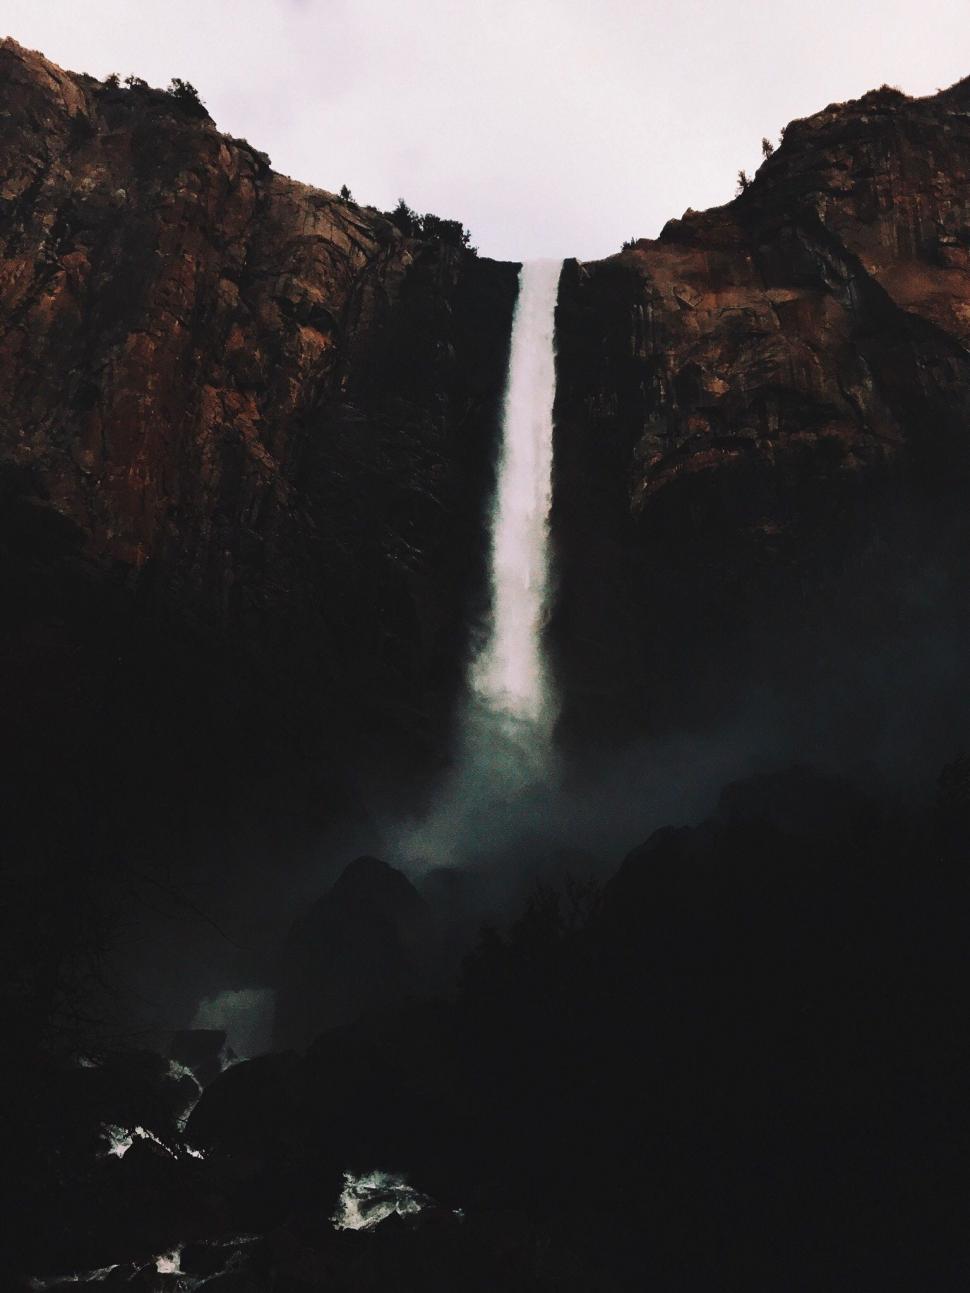 Free Image of Majestic Waterfall Towering in Mountain Landscape 